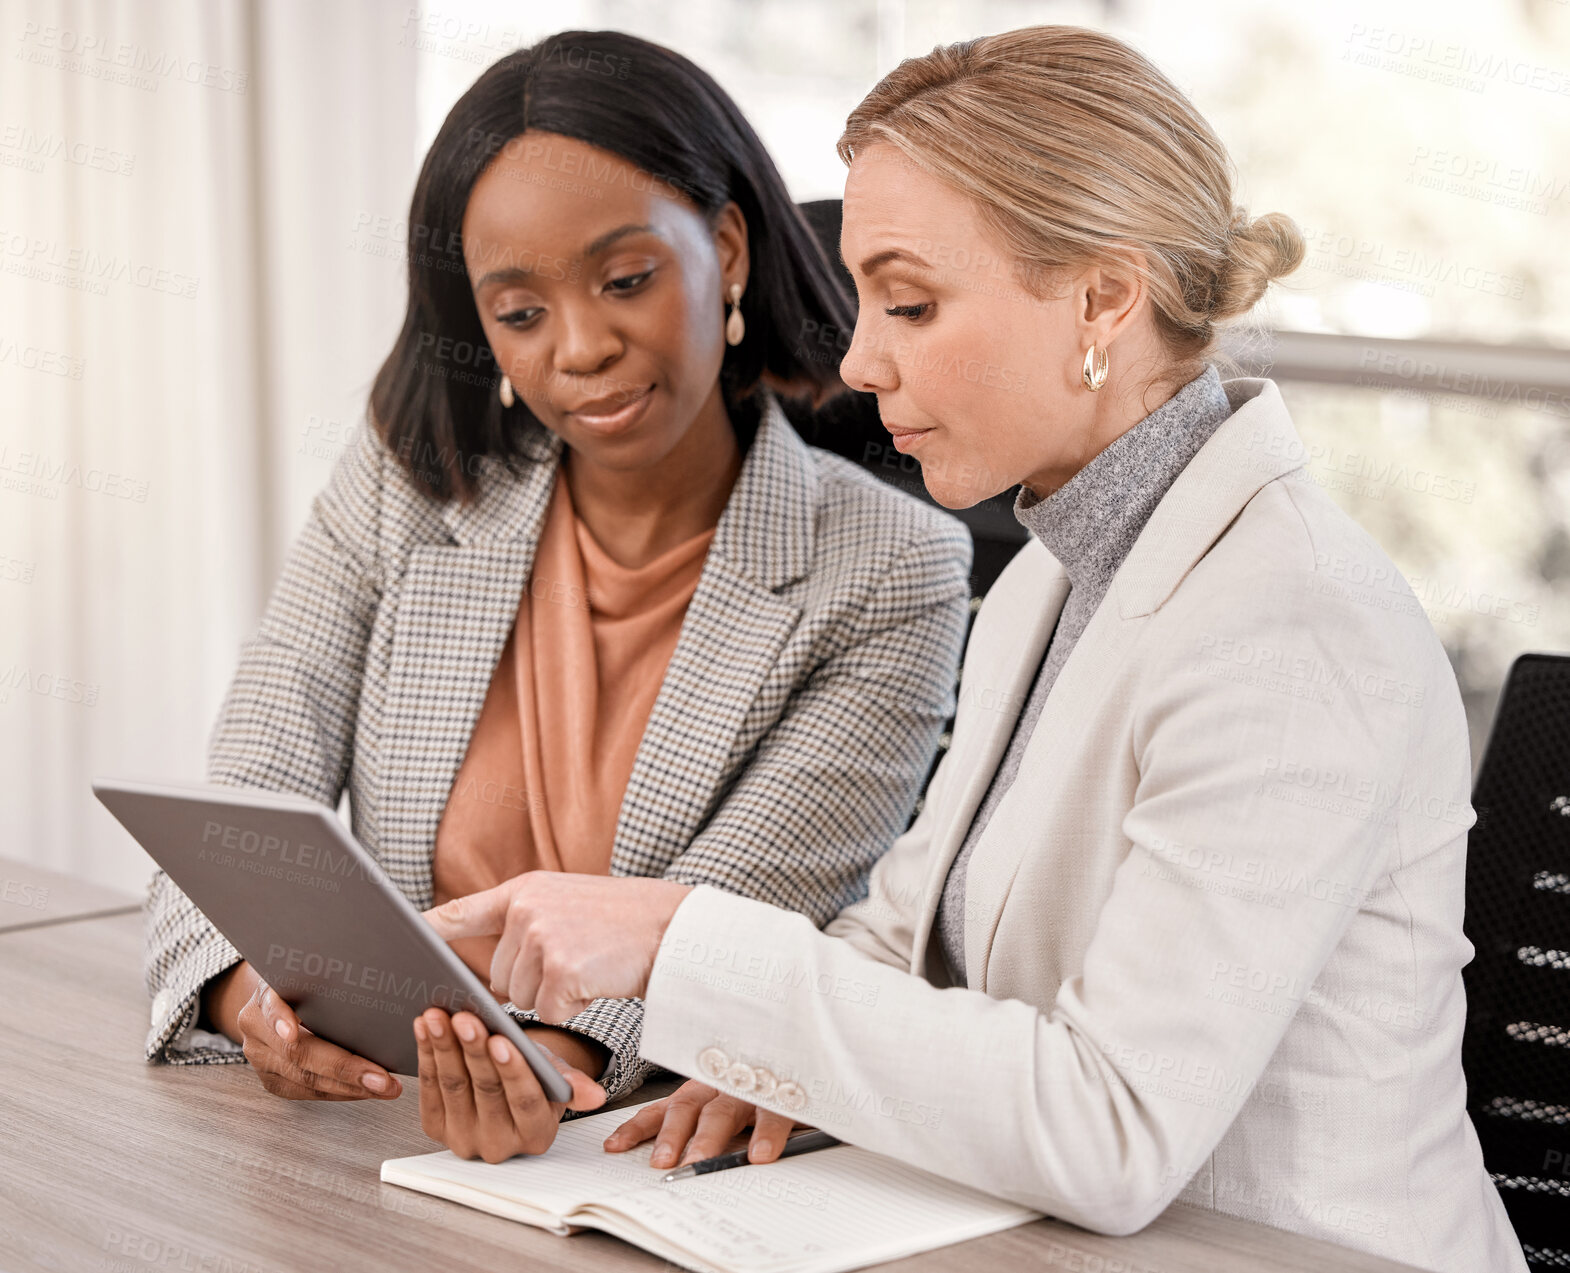 Buy stock photo Shot of two businesswomen planning together while using a digital tablet